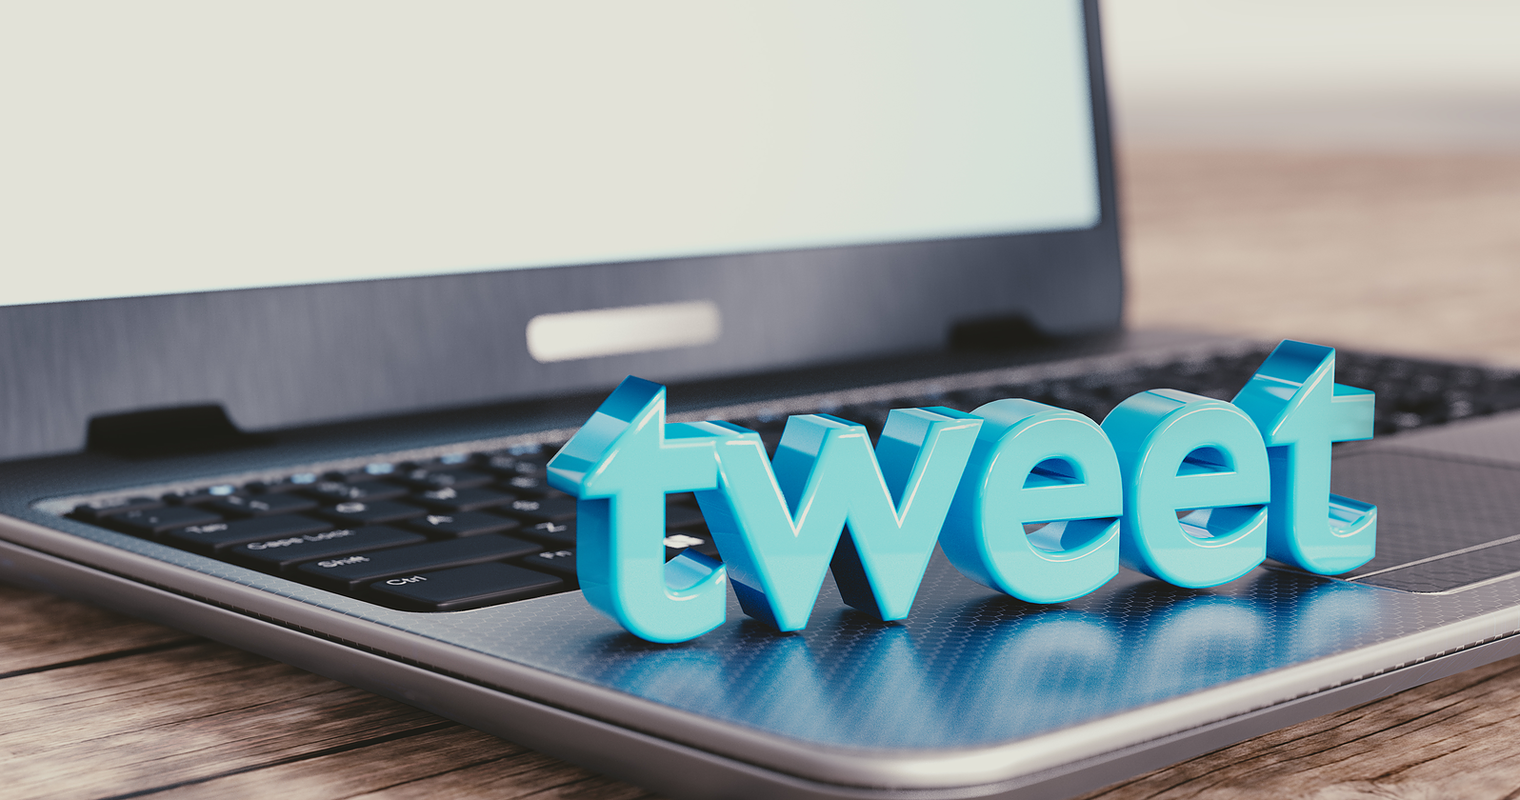 How To Easily Search For Tweets By Date On Twitter